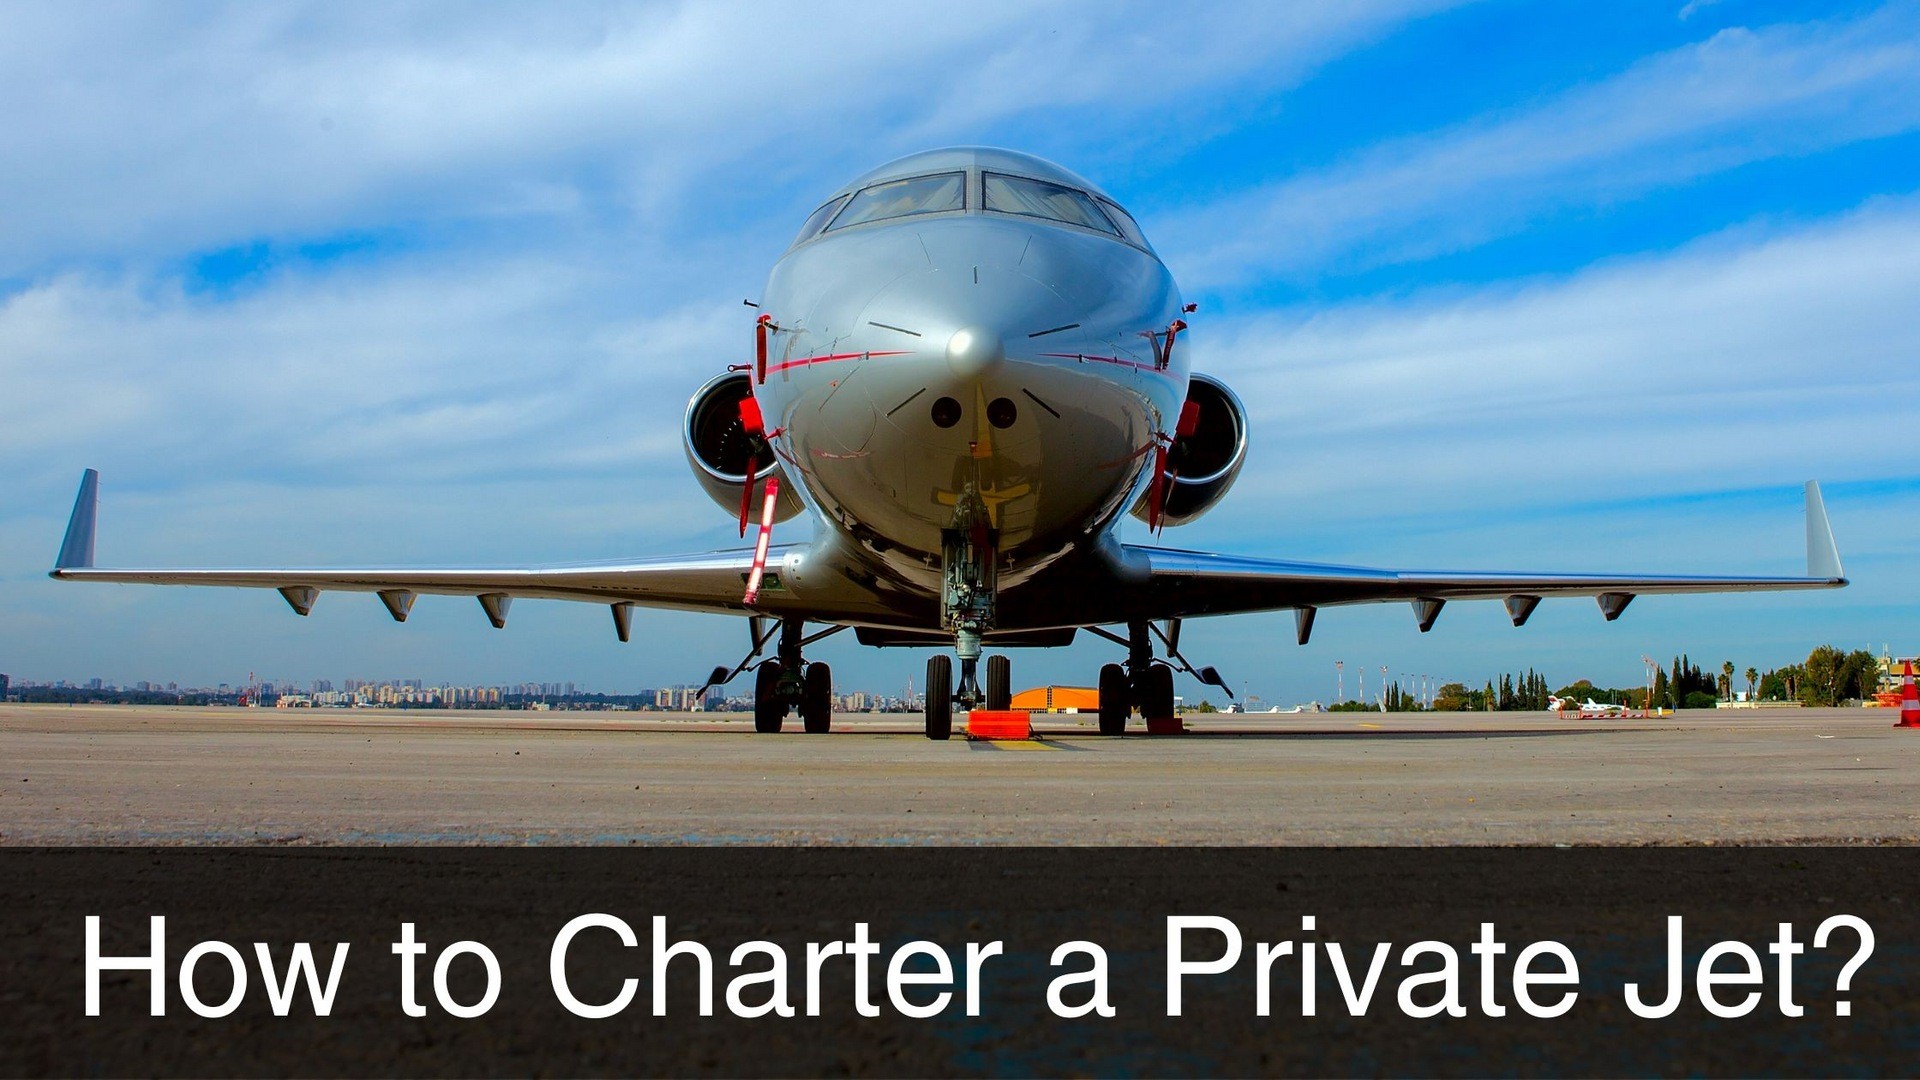 How to Charter a Private Jet?